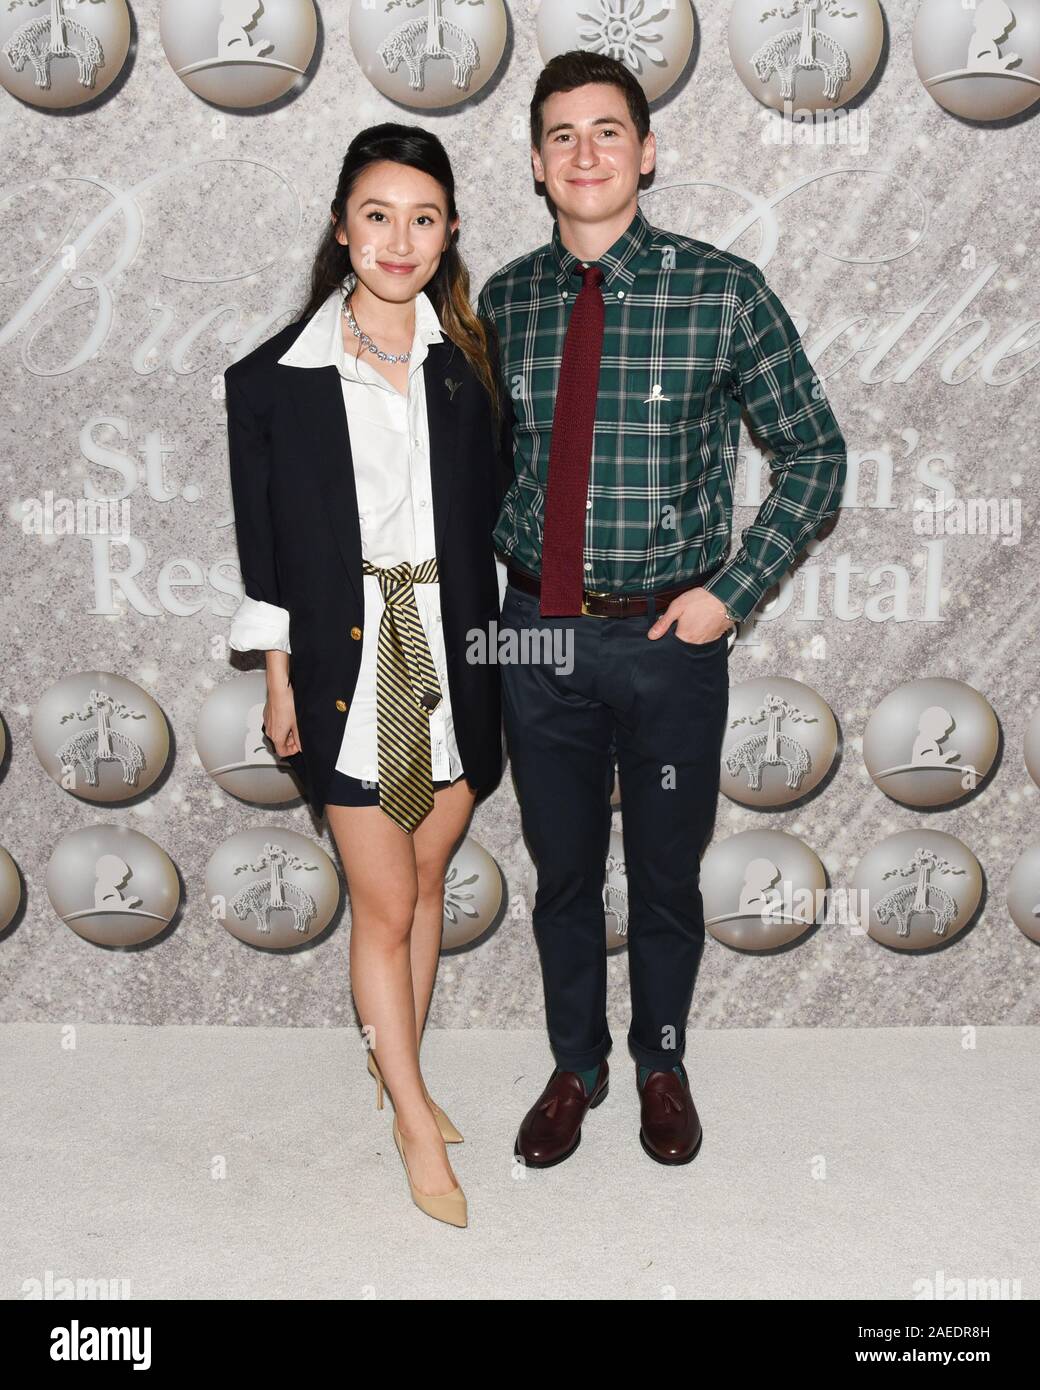 December 7, 2019, West Hollywood, California, USA: Olivia Sui and Sam Lerner attends Brooks Brothers Host Annual Holiday Celebration in West Hollywood to Benefit St. Jude. (Credit Image: © Billy Bennight/ZUMA Wire) Stock Photo